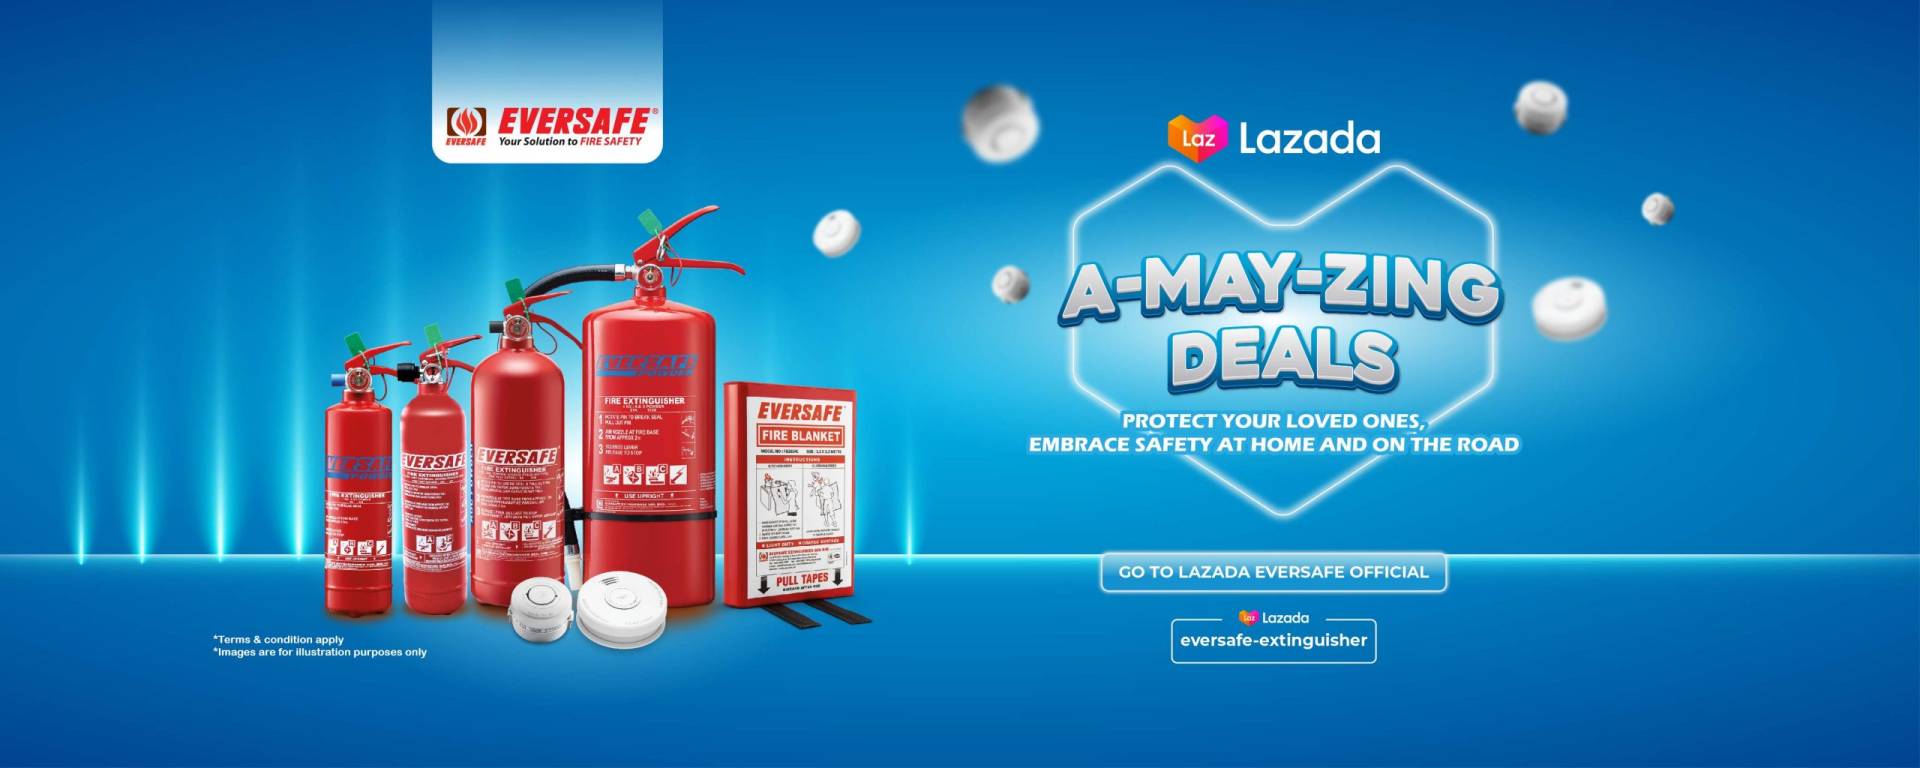 Lazada Eversafe Extinguisher Your Solution to Fire Safety